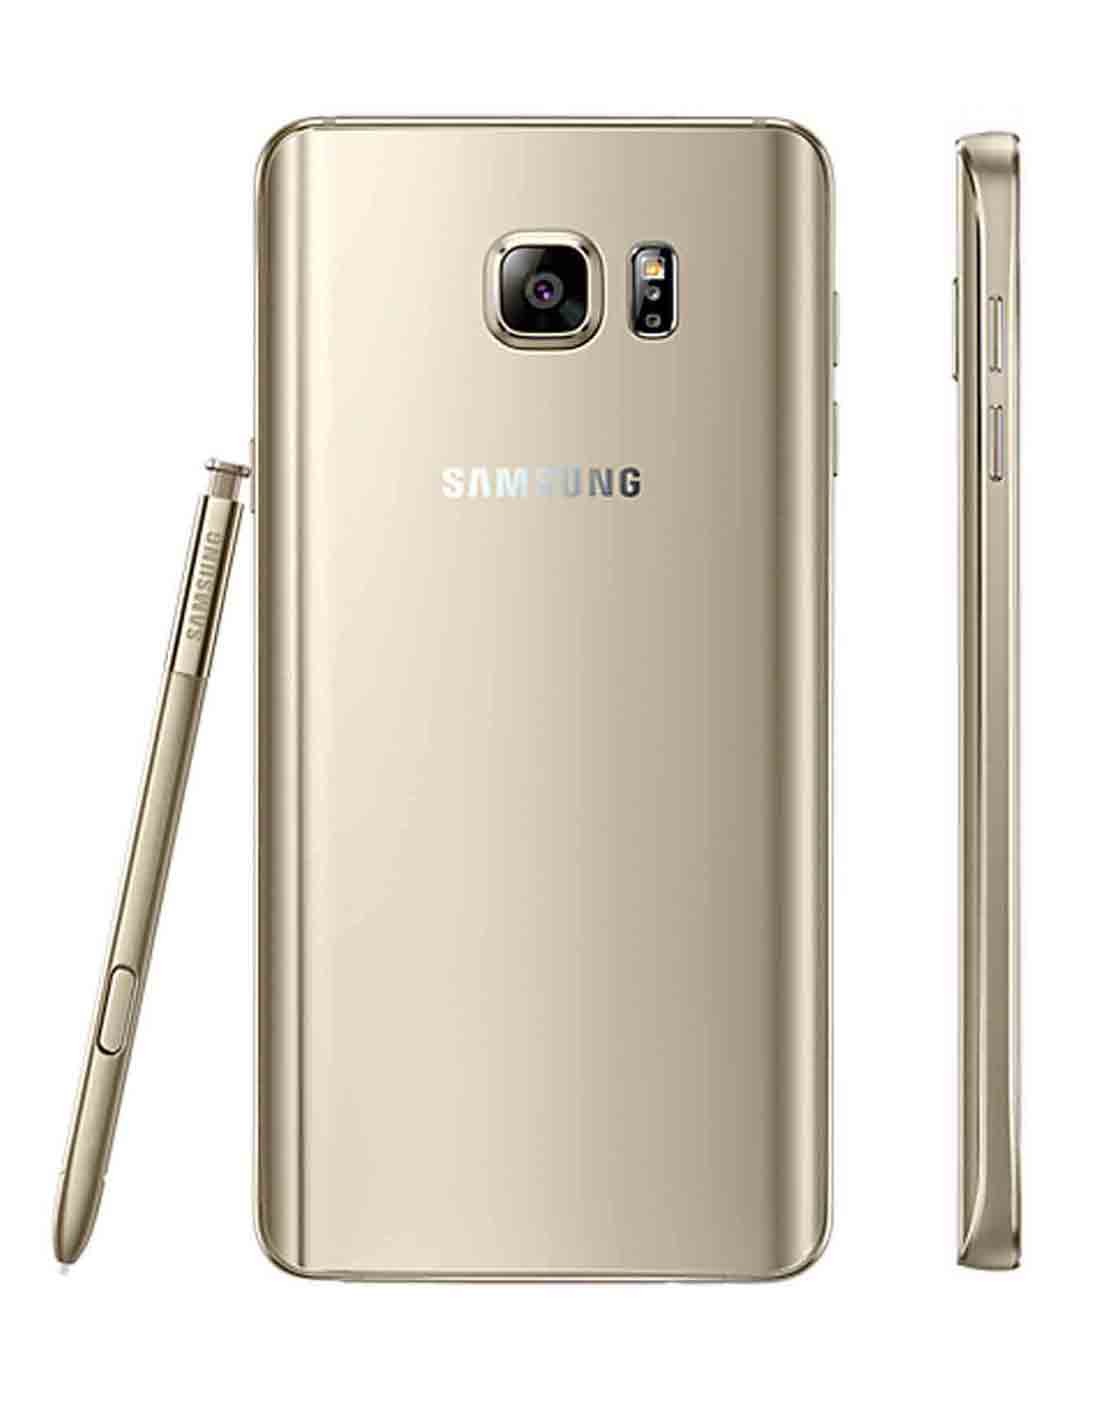 Samsung Galaxy Note 5 Duos N920CD Gold Images and Photos